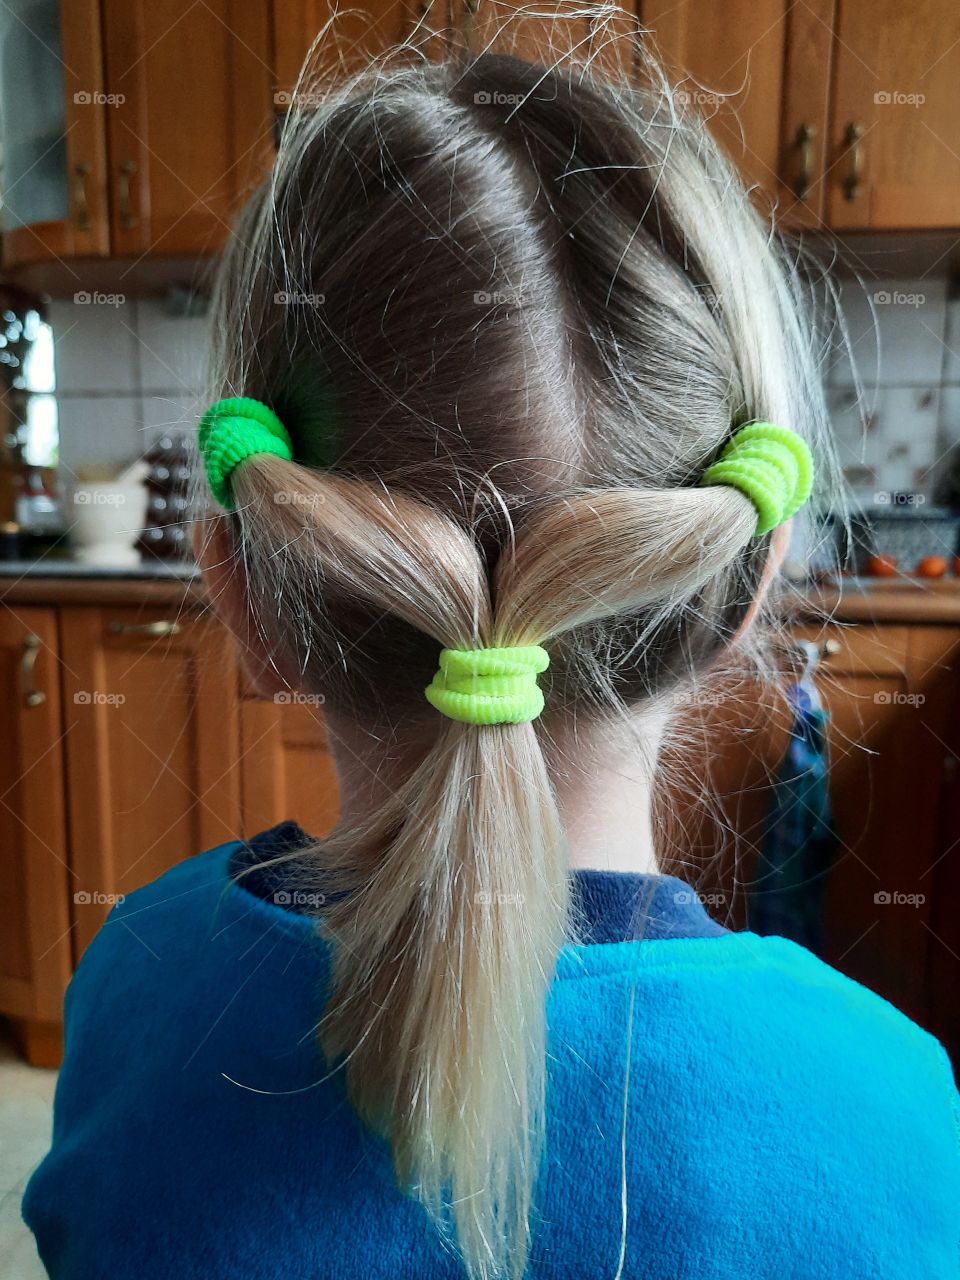 power of three - three ponytails in a little girl